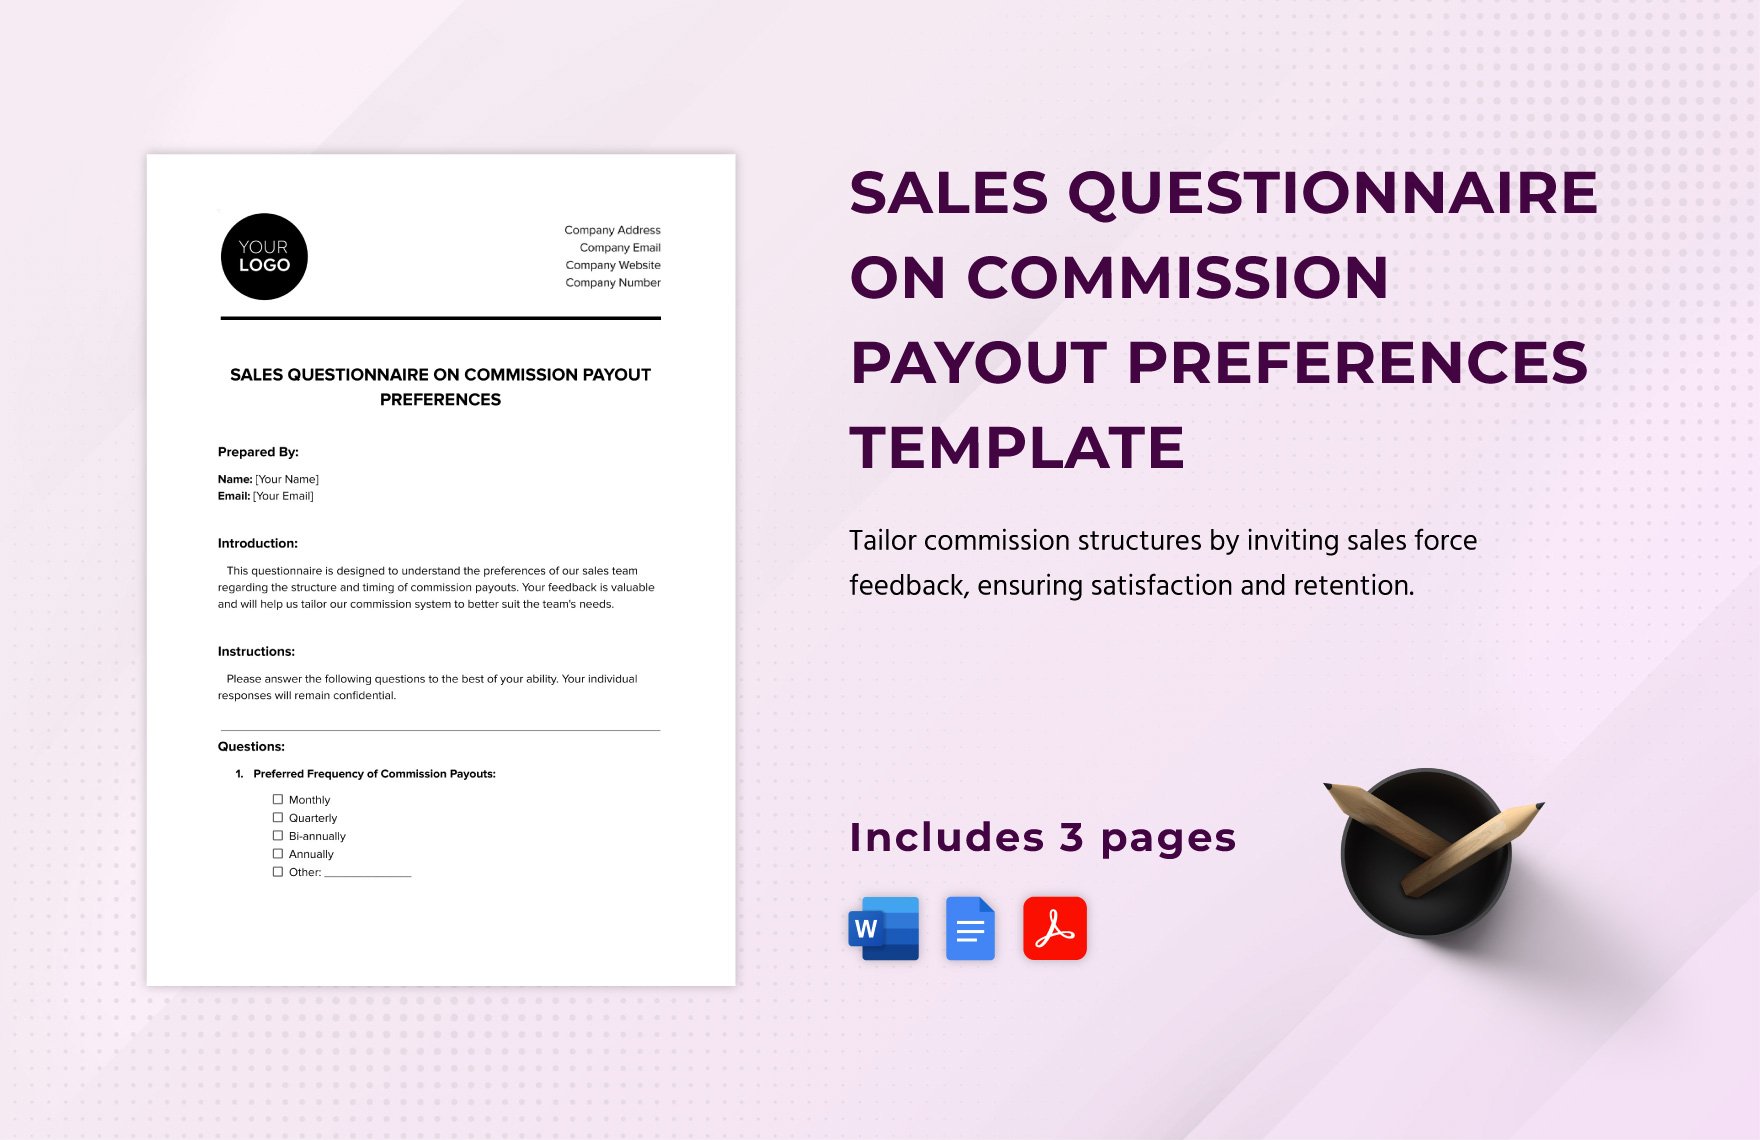 Sales Questionnaire on Commission Payout Preferences Template